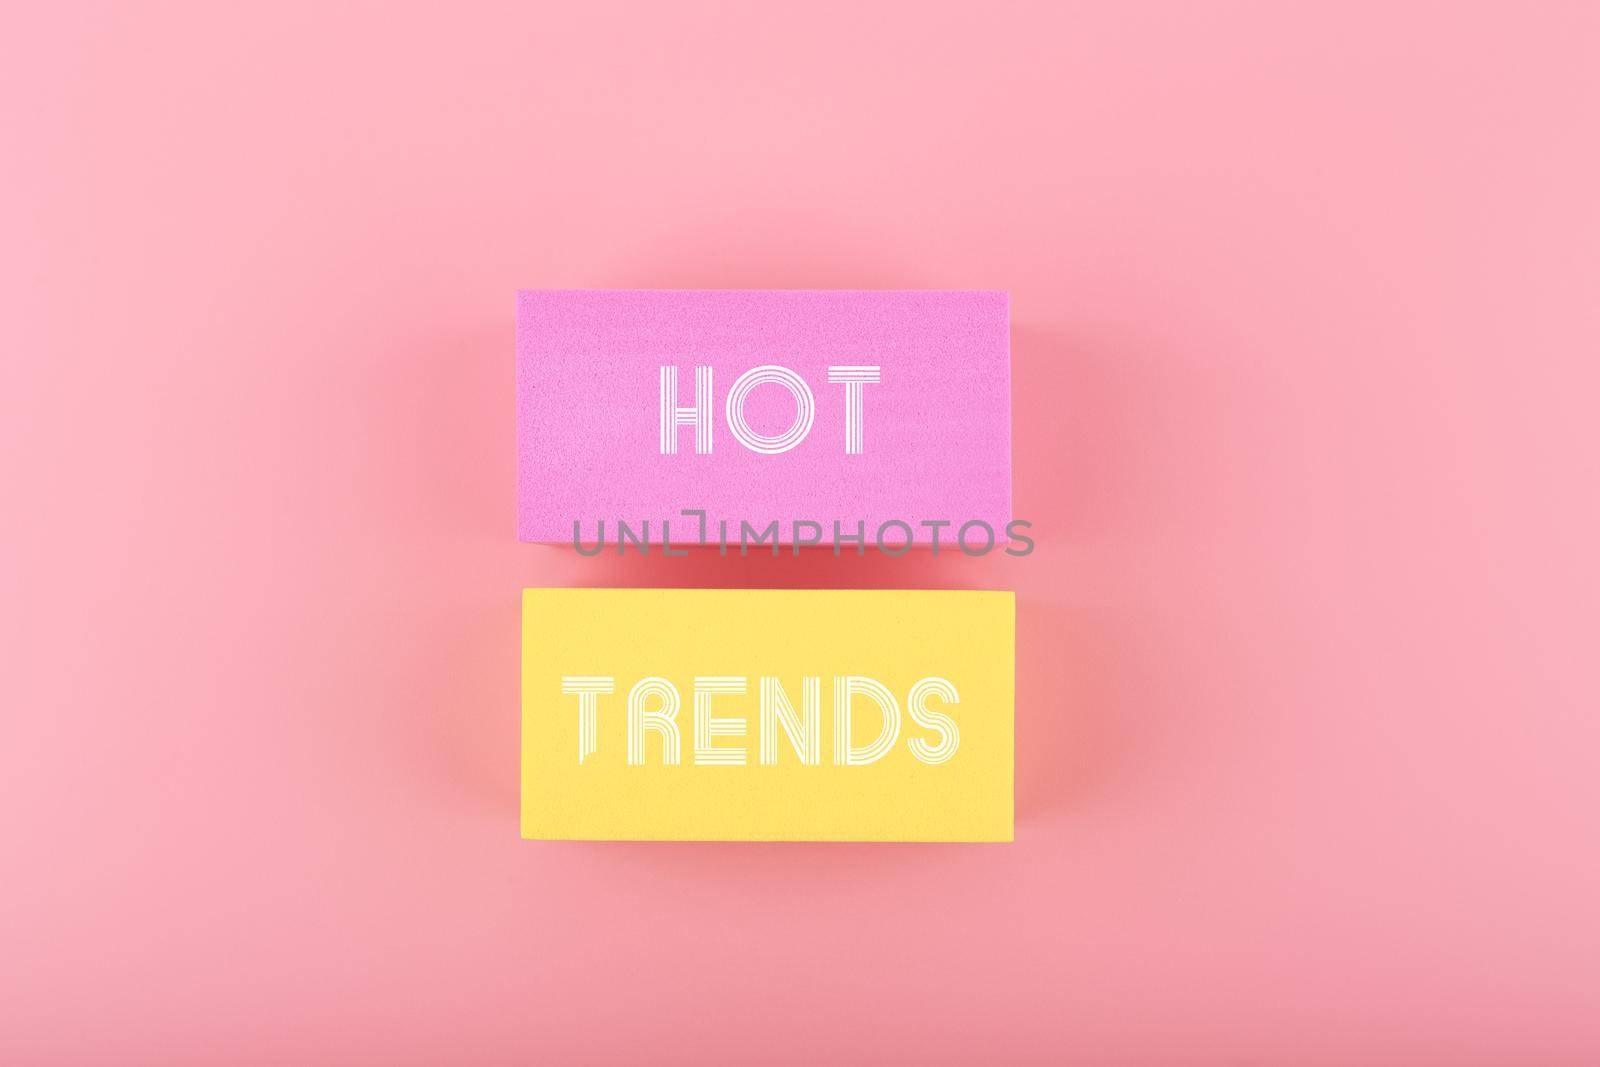 Hot trends written on colorful rectangles on light pink background. Concept of newest, latest, hot and popular trends of 2022